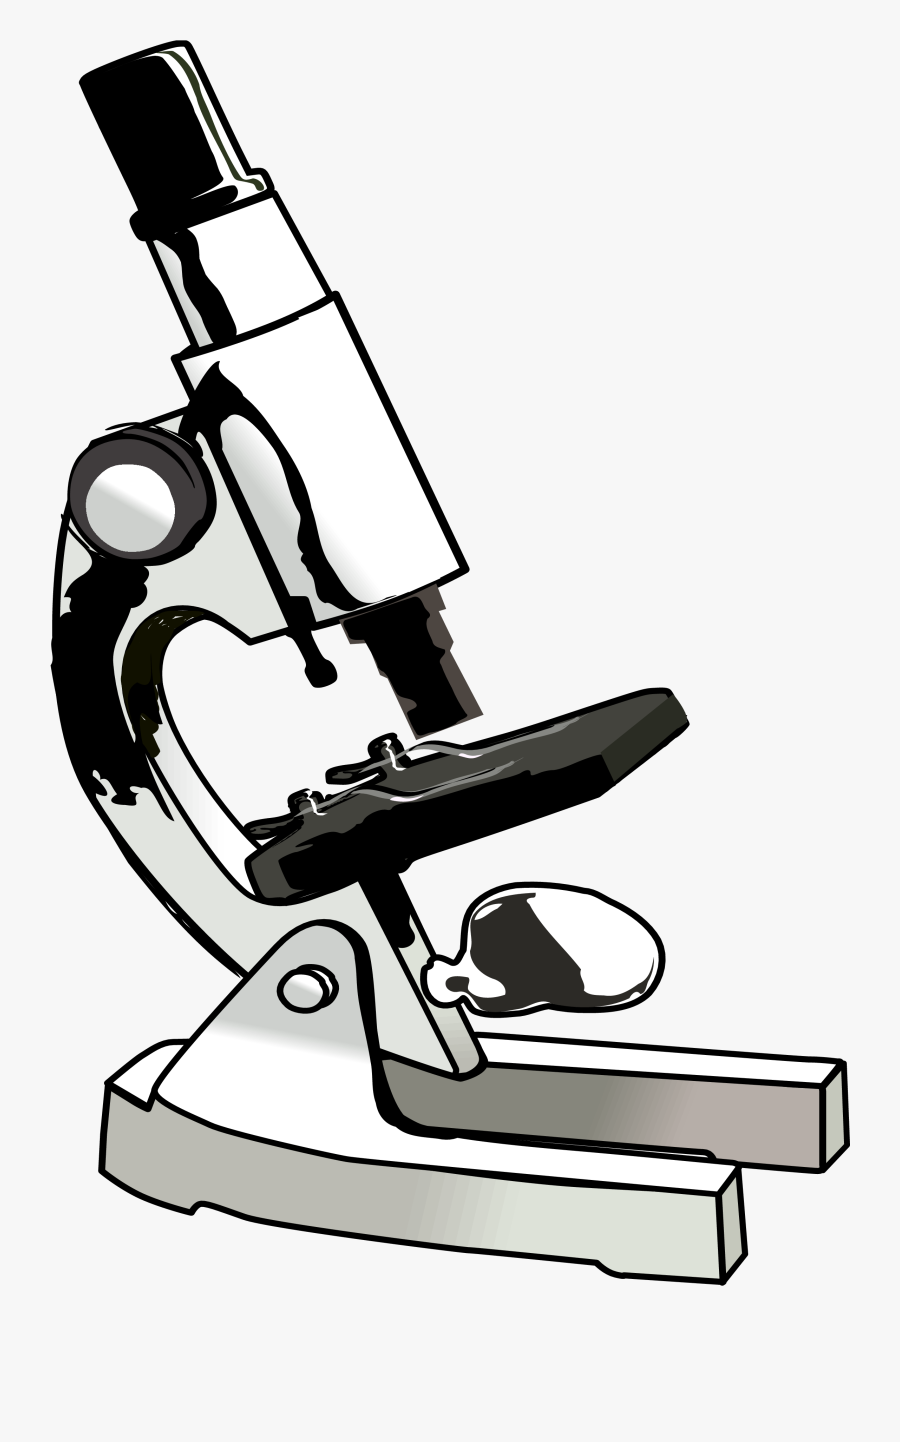 Parts Of A Microscope Worksheet - Microscope Clipart, Transparent Clipart